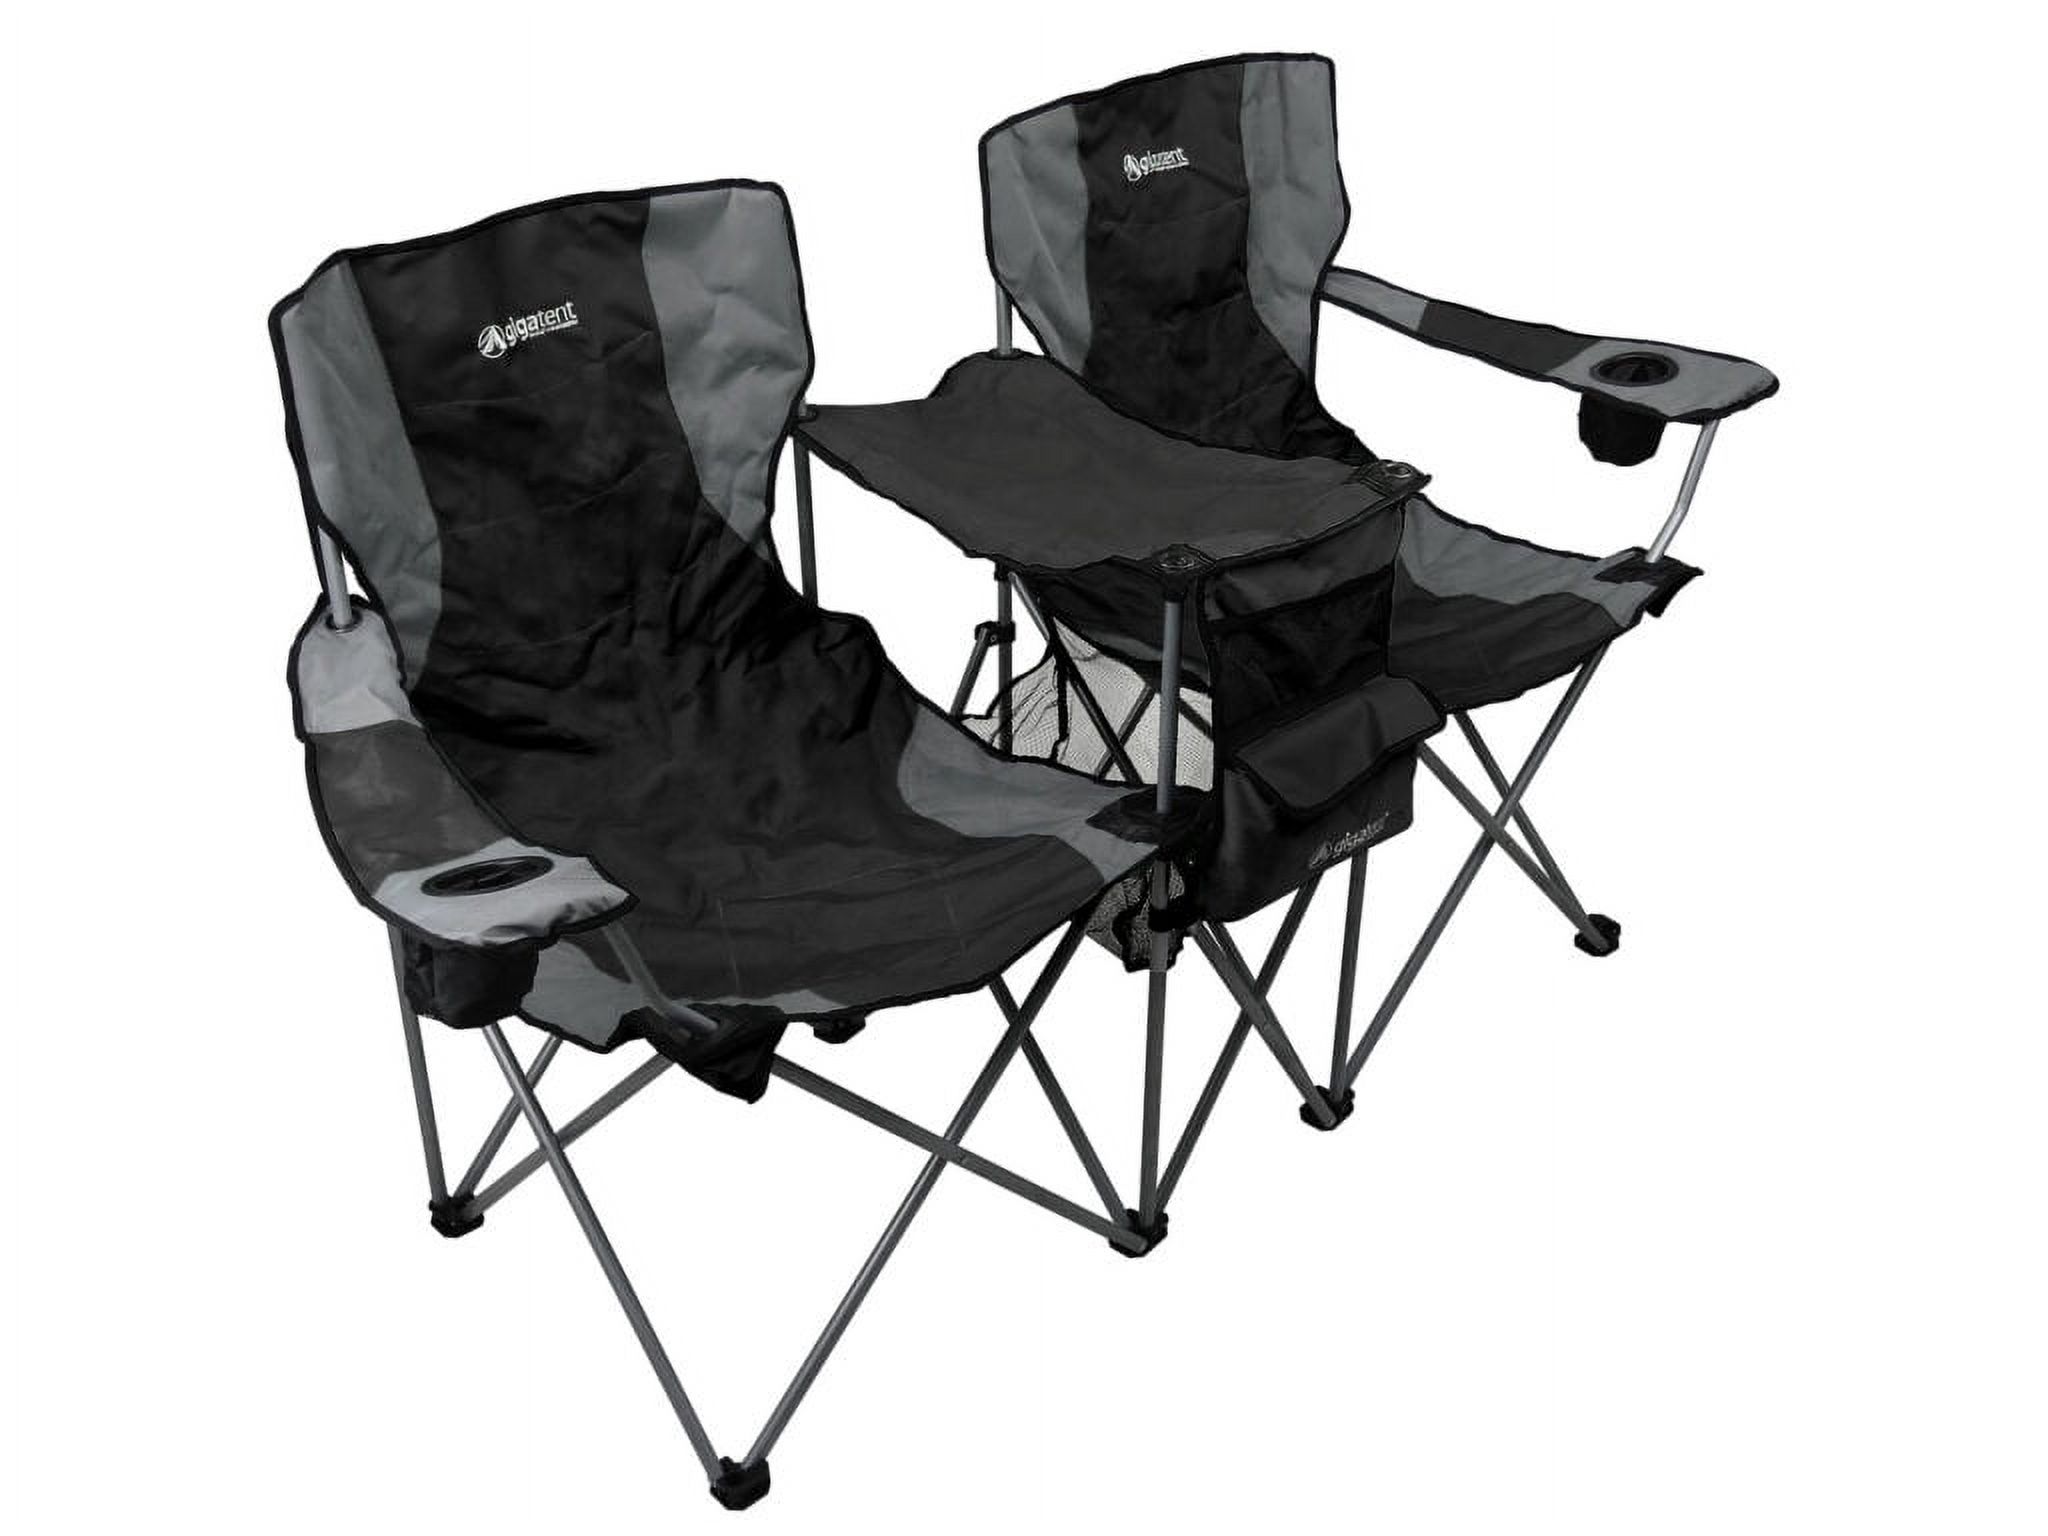 GigaTent Double Outdoor Chairs – 2 Side by Side Folding Quad Camping Seats, Black - image 1 of 5